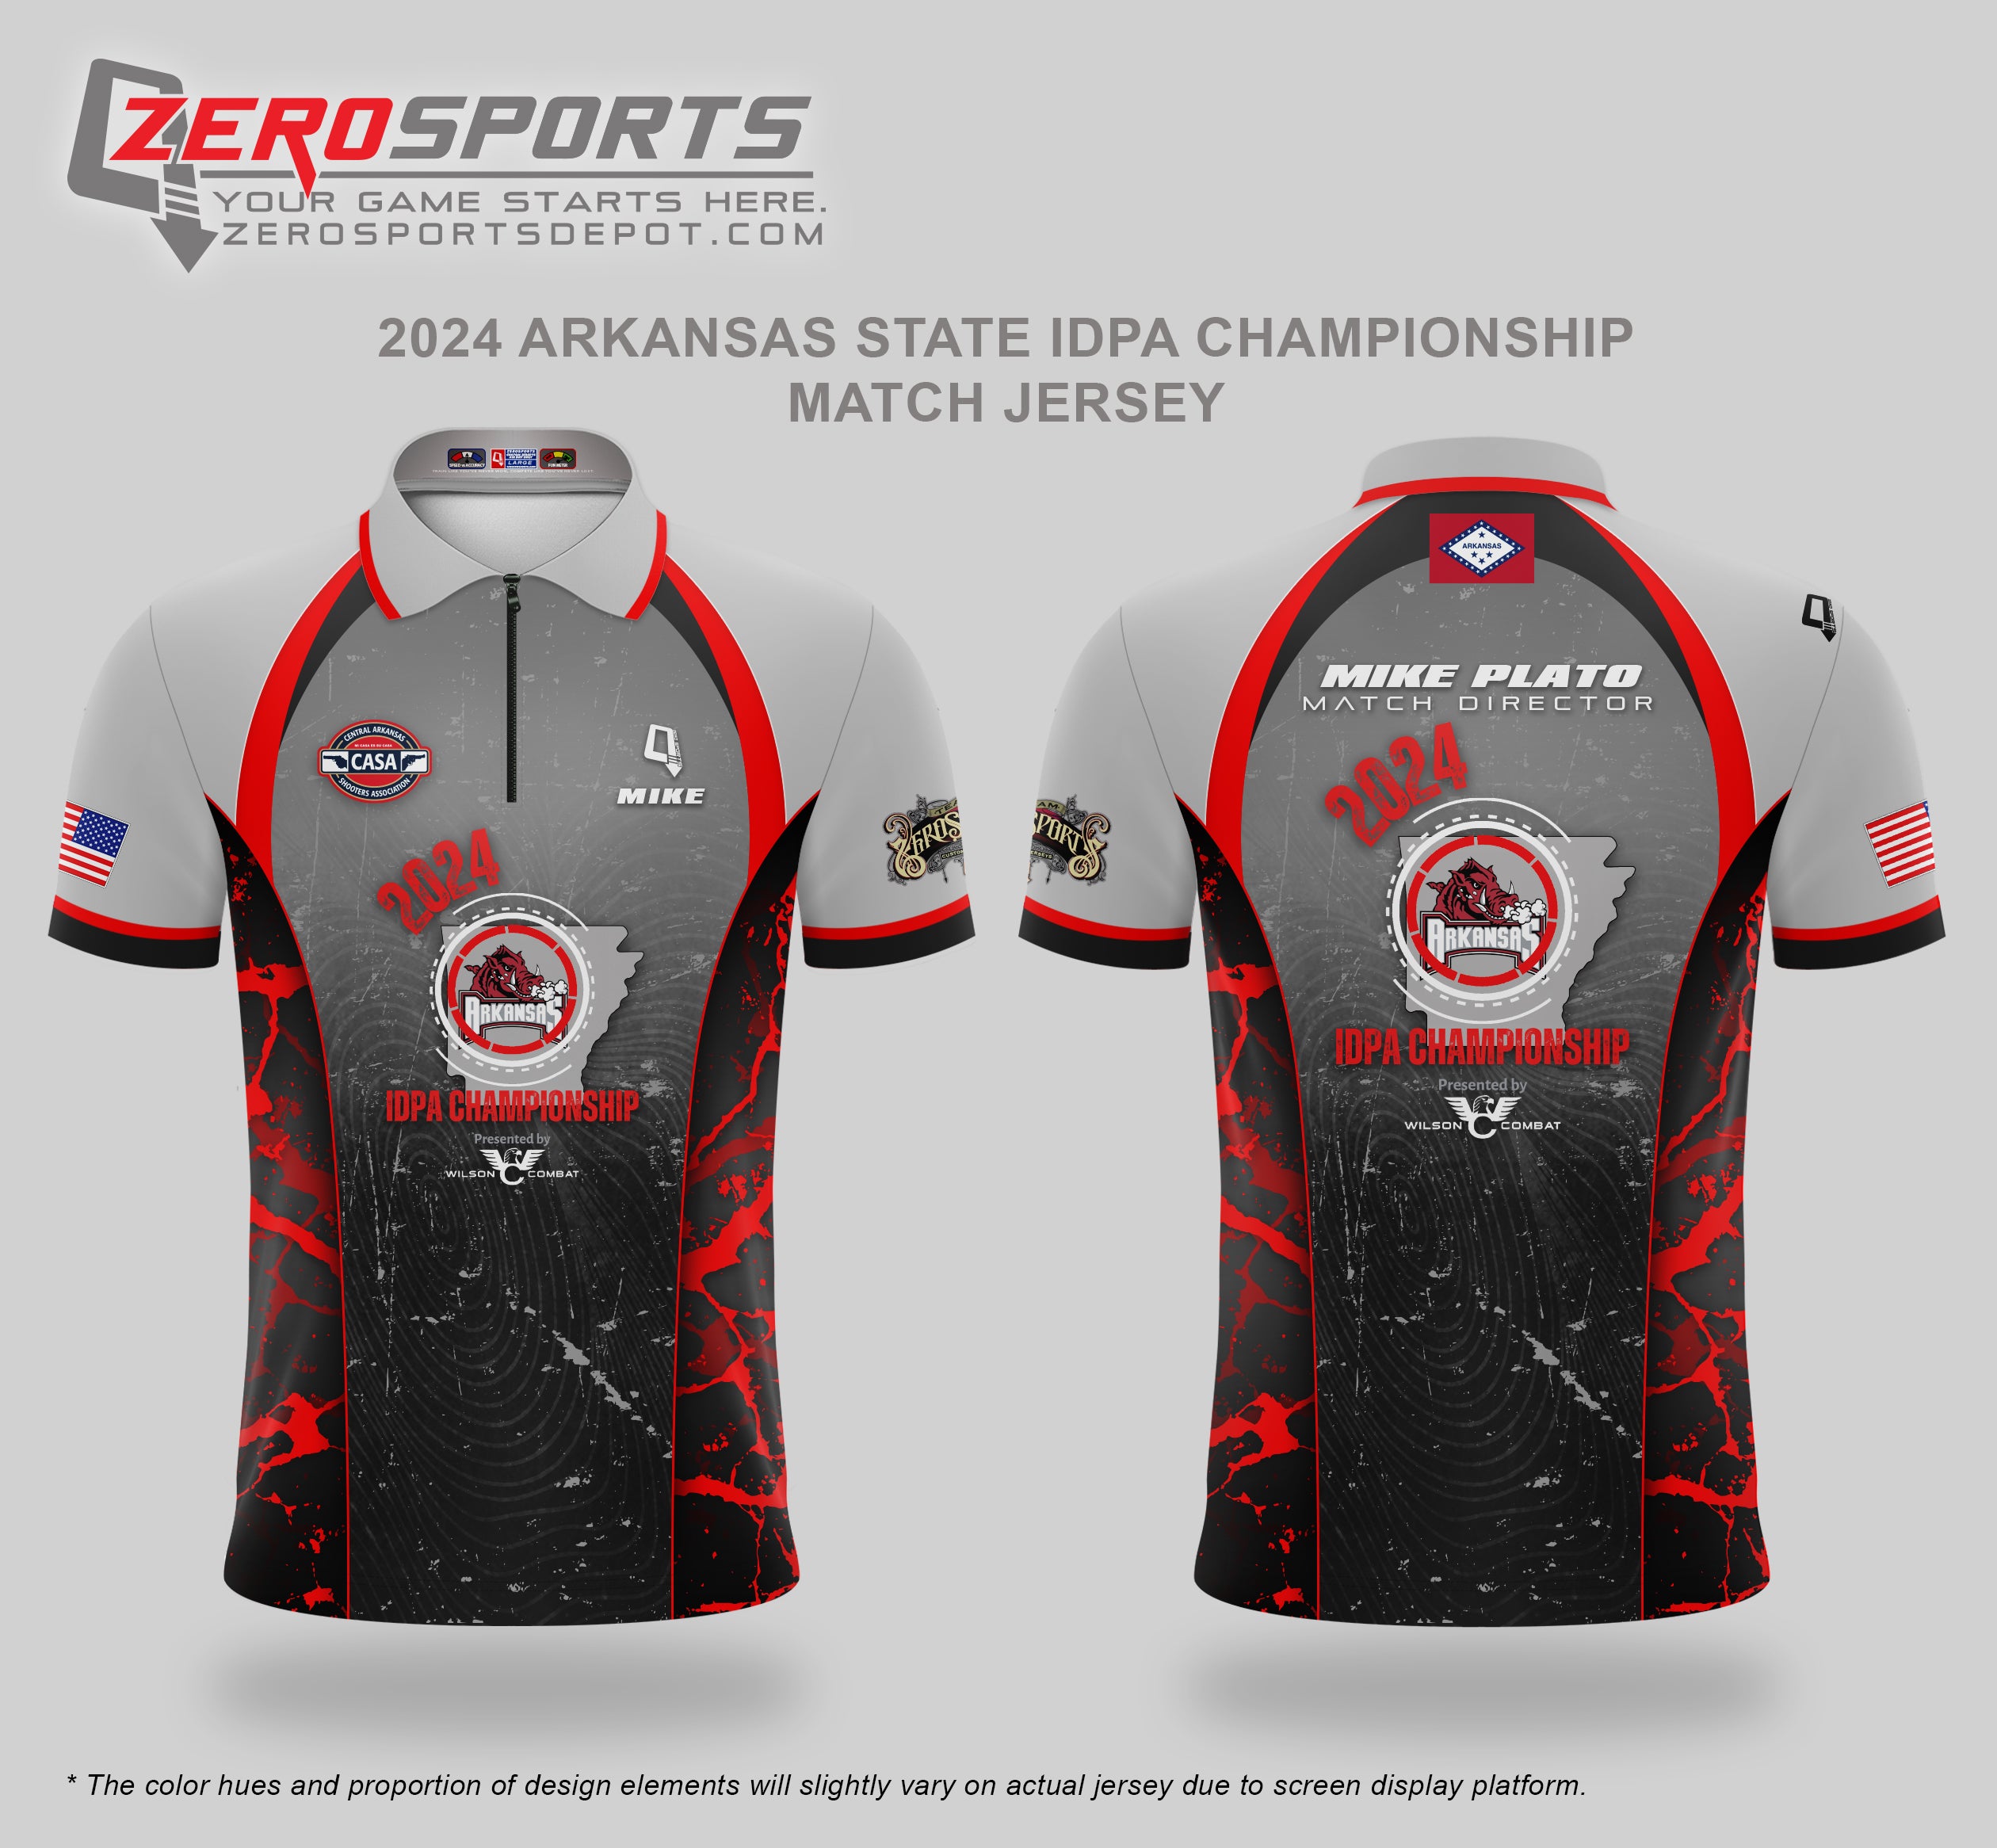 2024 Arkansas State IDPA Championship Match Jersey **All orders after 3/9/2024 will be shipped directly to your address after the match.